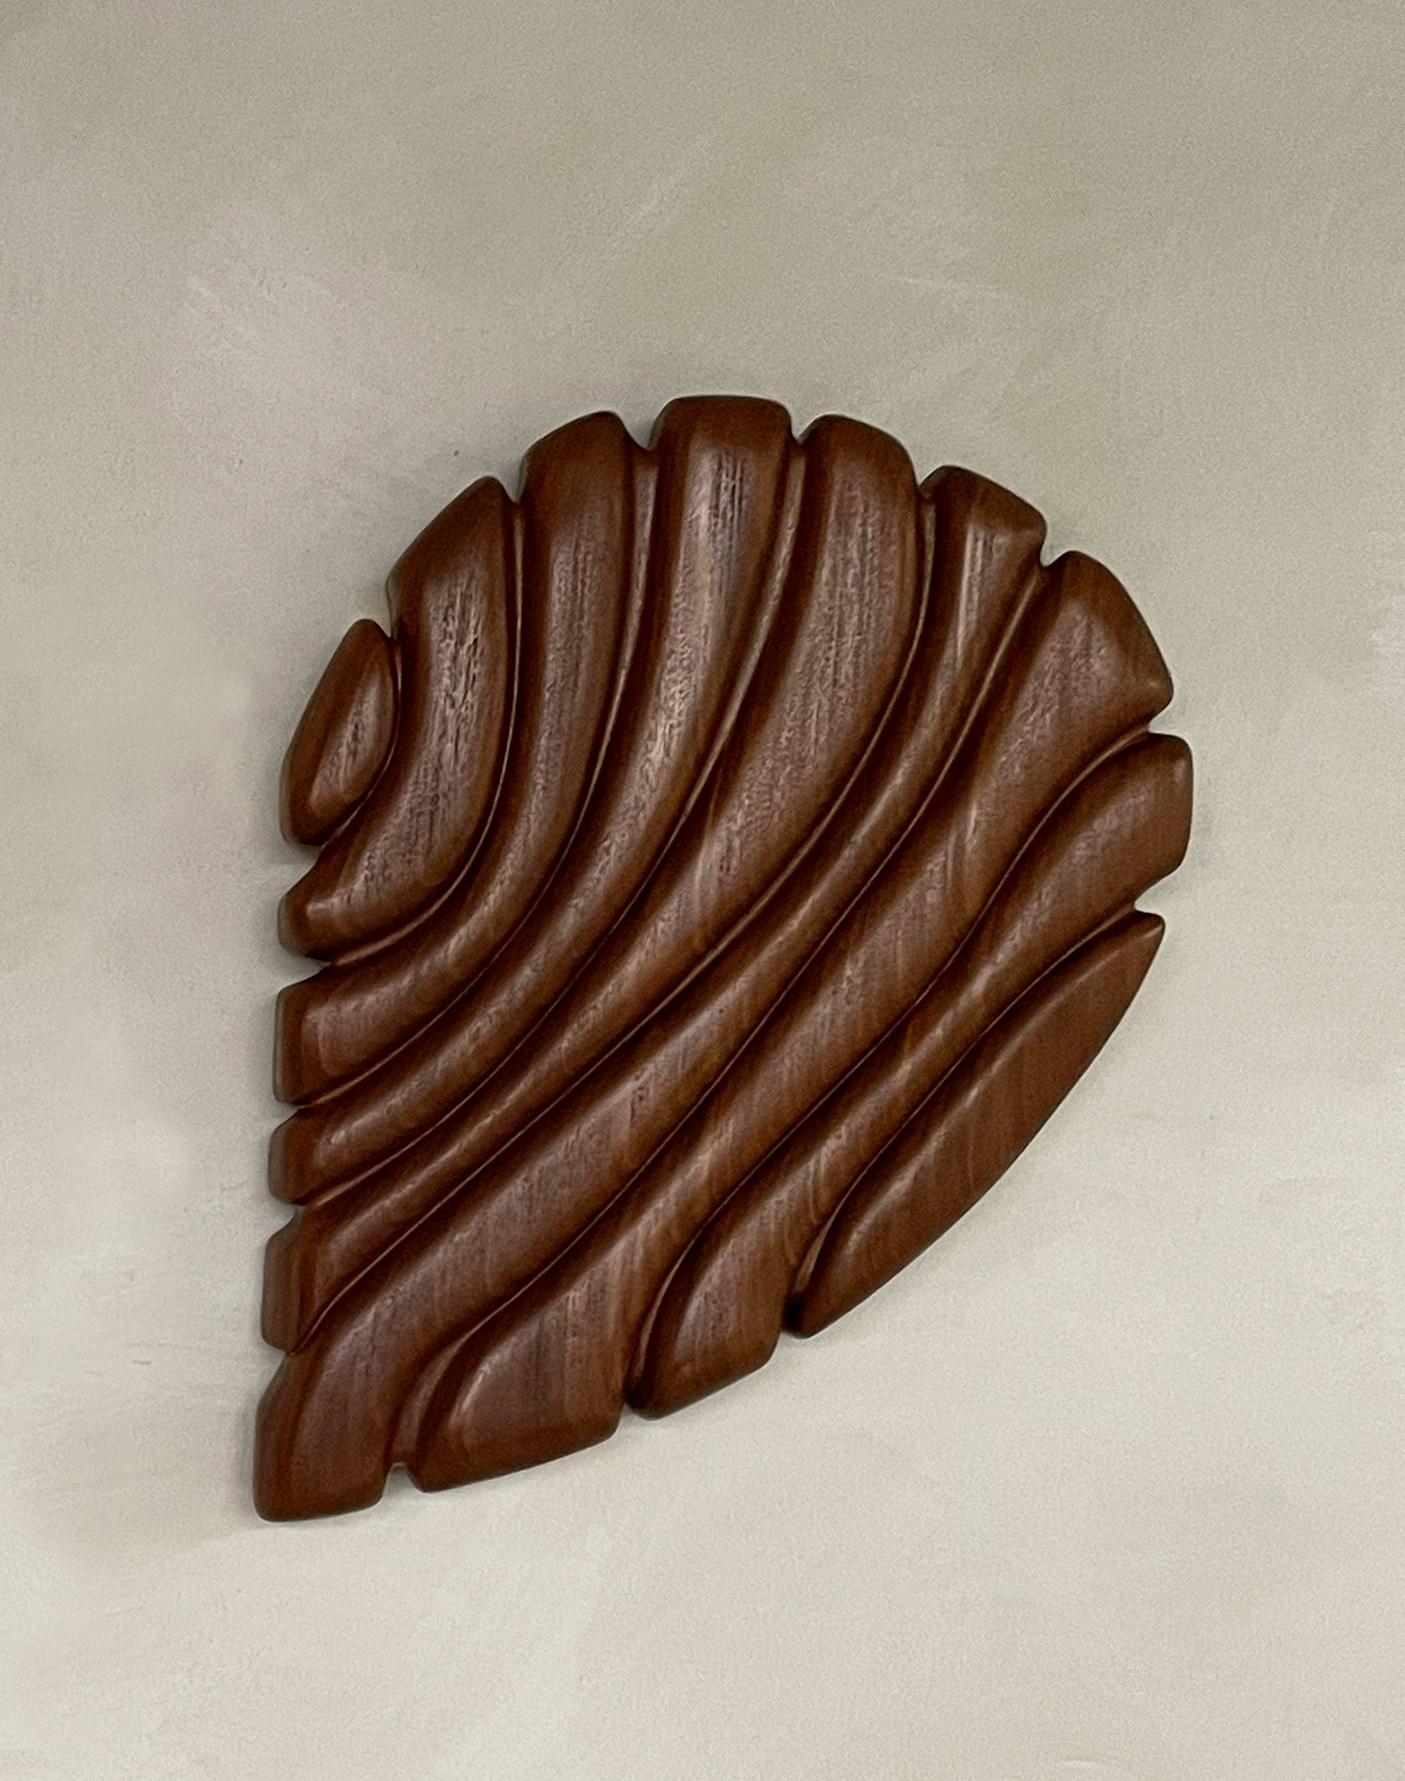 Fluentem Creatura Afrormosia Wall Sculpture by Eline Baas
Limited Edition of 3 pieces.
Dimensions: D 5 x W 35 x H 45 cm.
Materials: Solid oiled Afrormosia wood.

STUDIO ELINE BAAS is an Amsterdam-based Interior Design studio. 

Whether it is